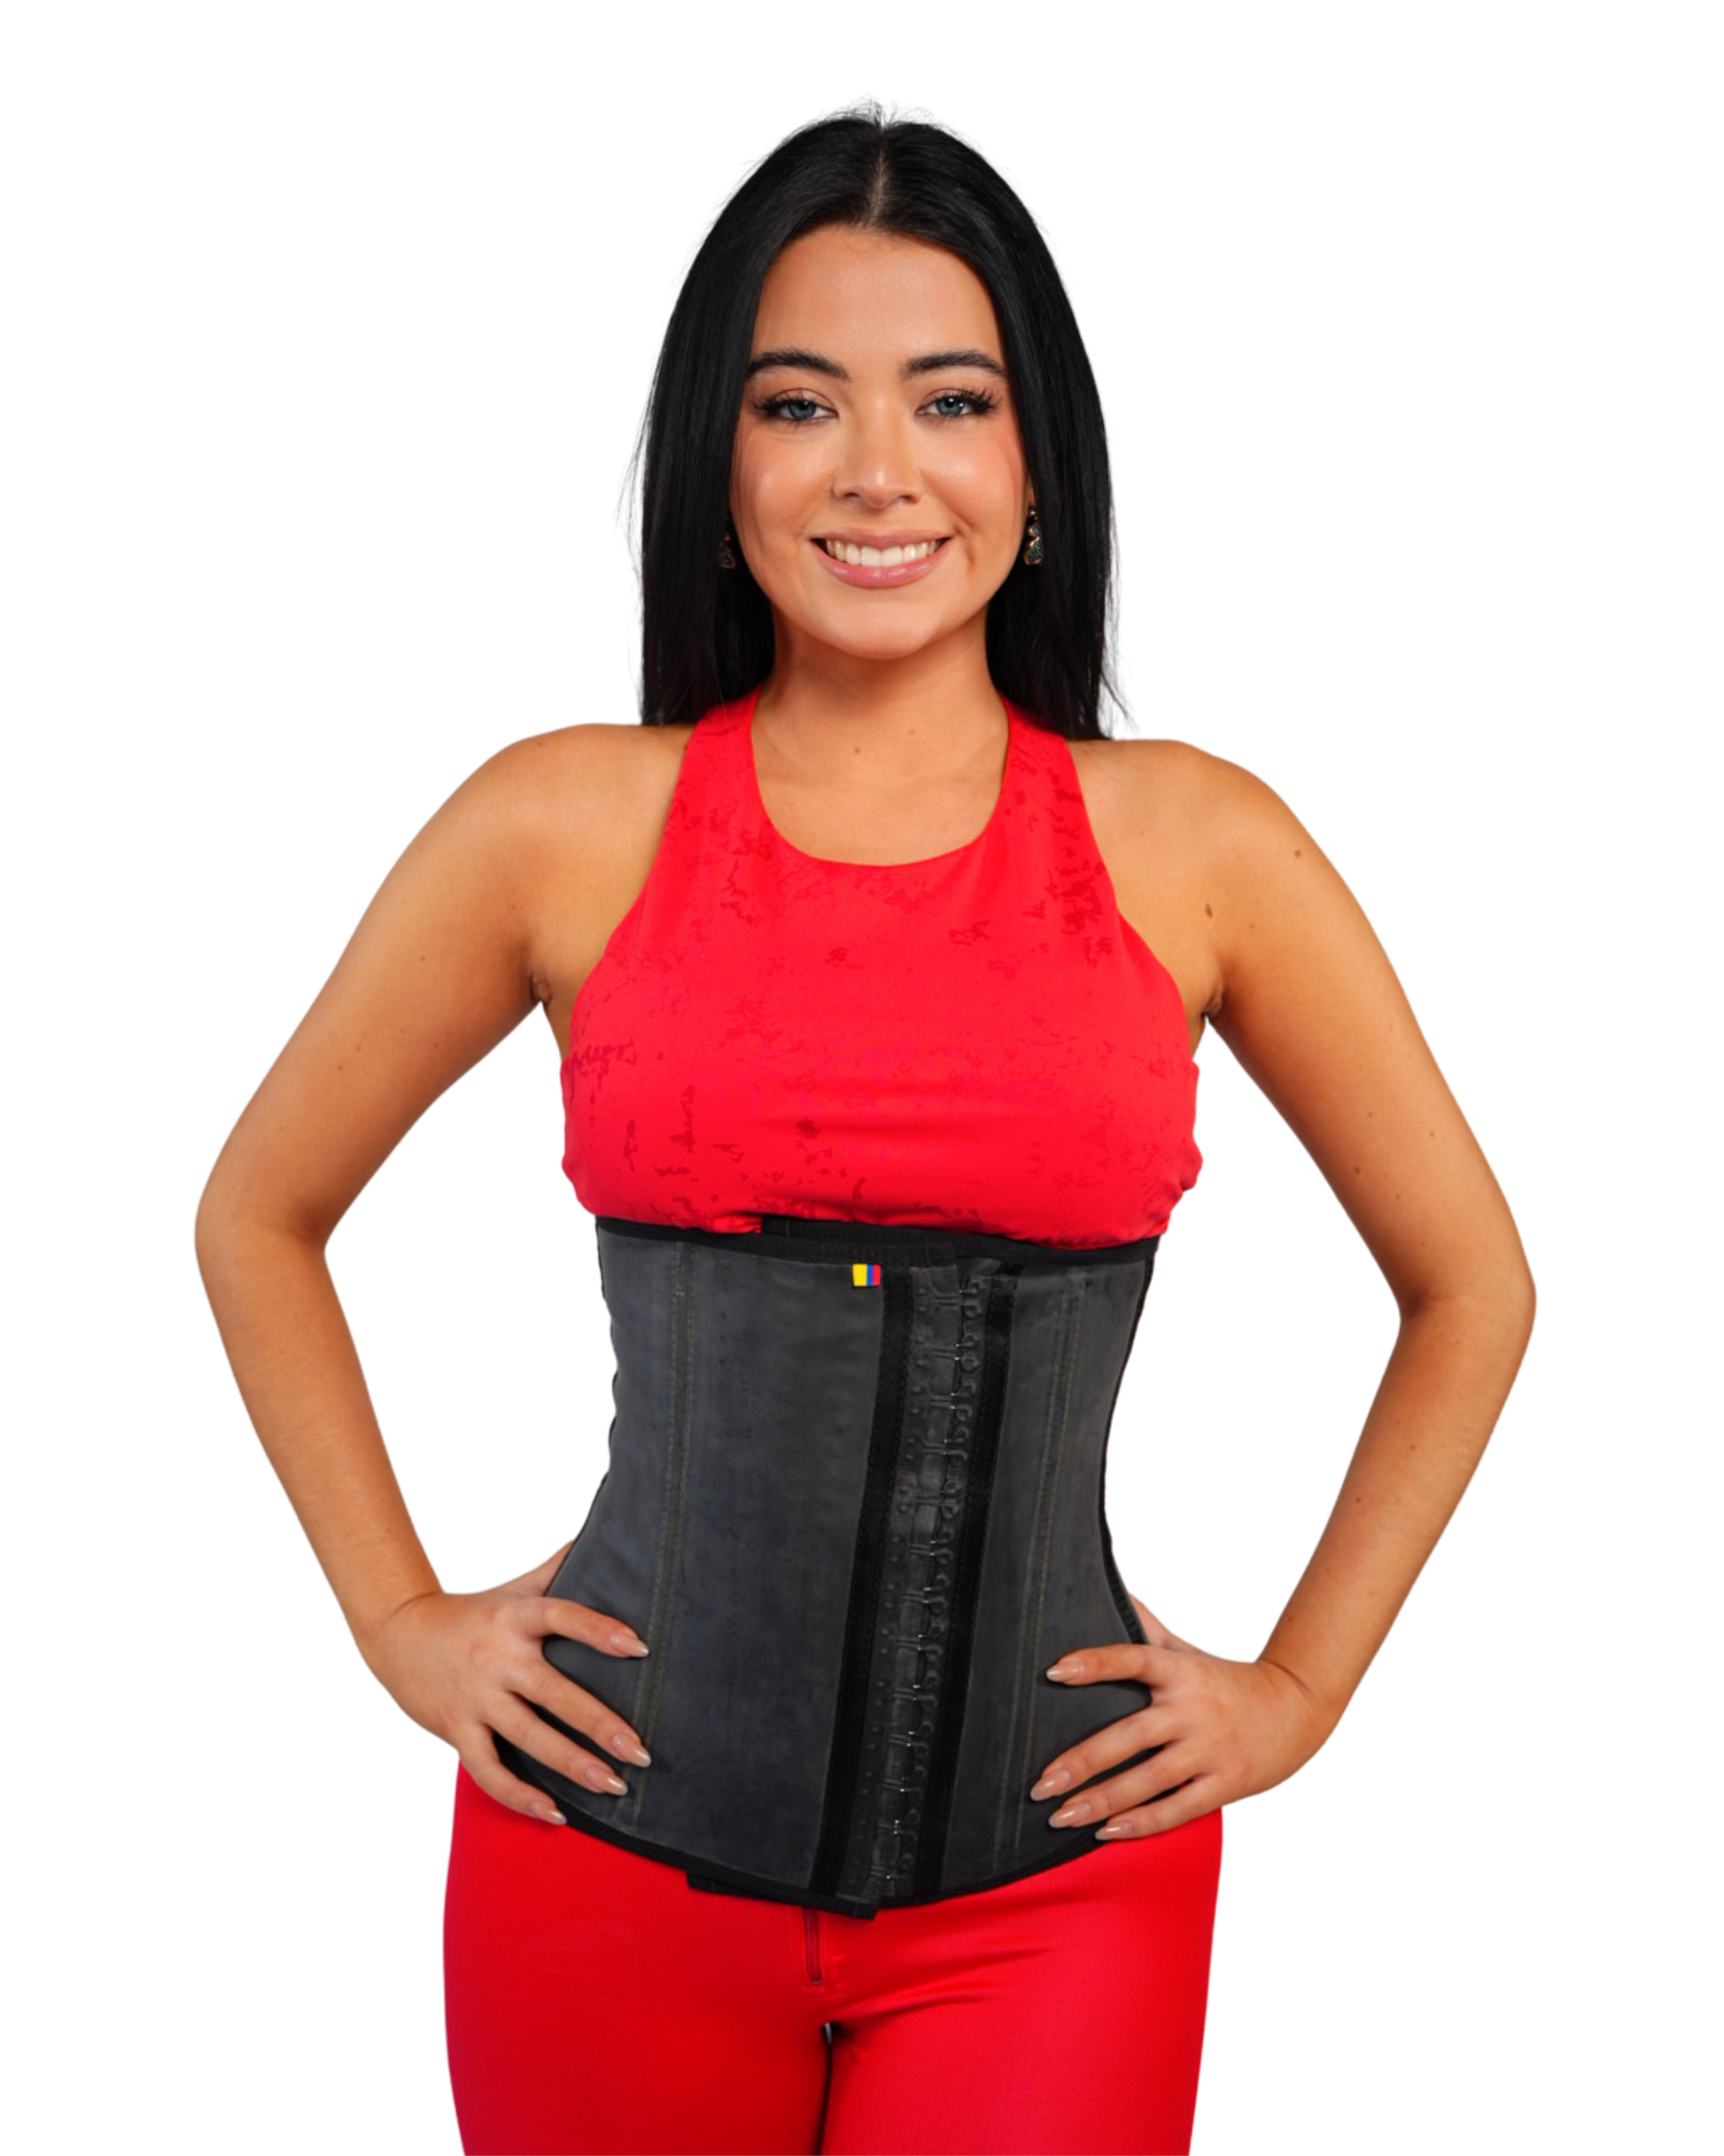 Latex Waist Trainer with Hooks or Without. Which Works Best